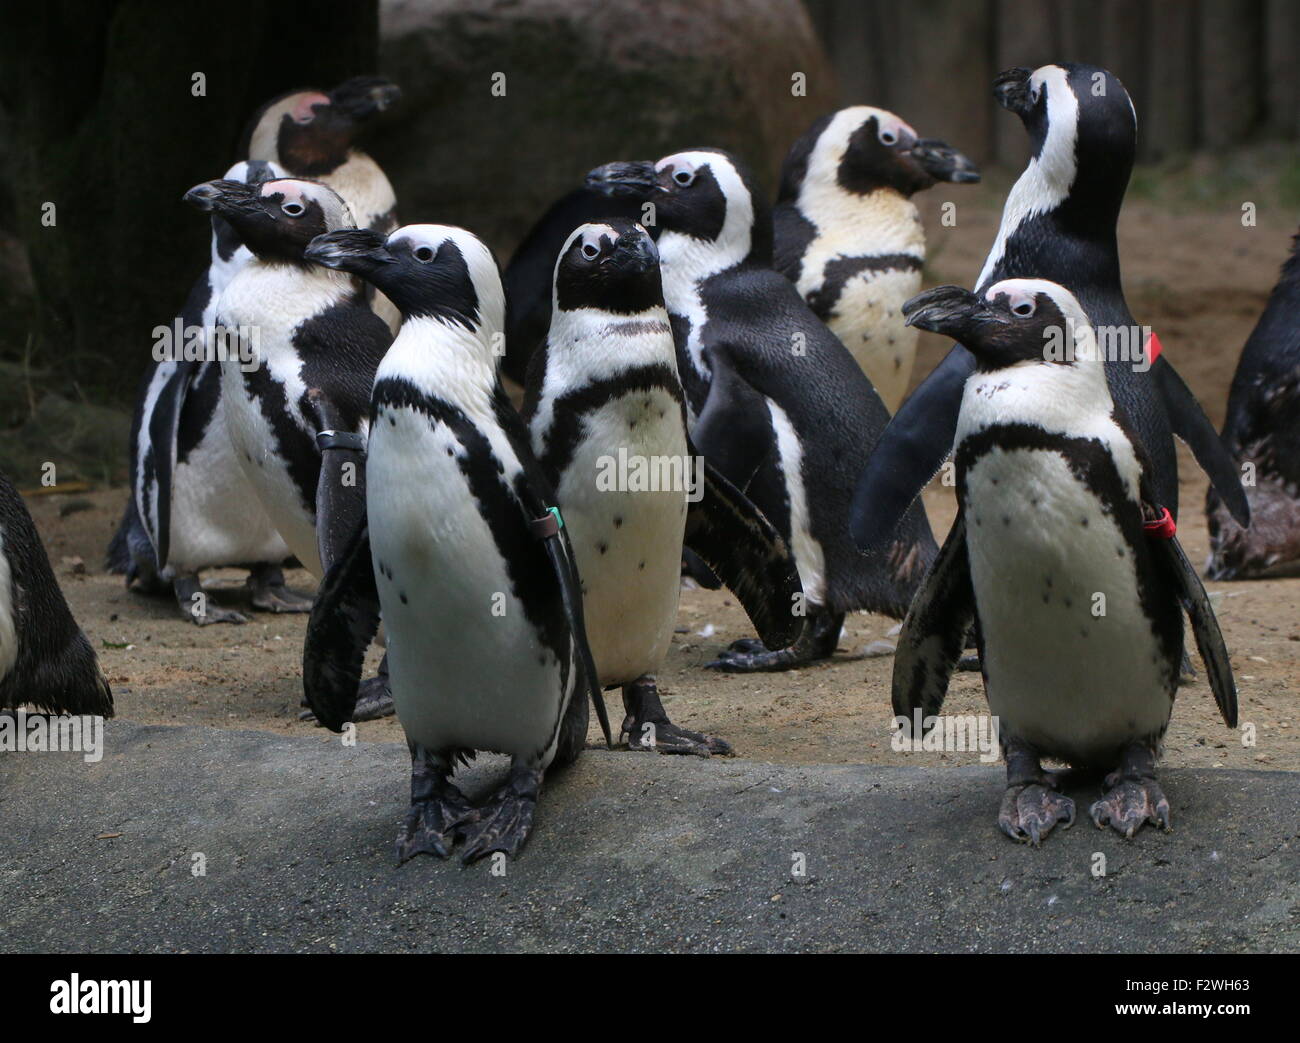 Large group of Black footed penguins (Spheniscus demersus), a.k.a. African penguin or Jackass penguin Stock Photo